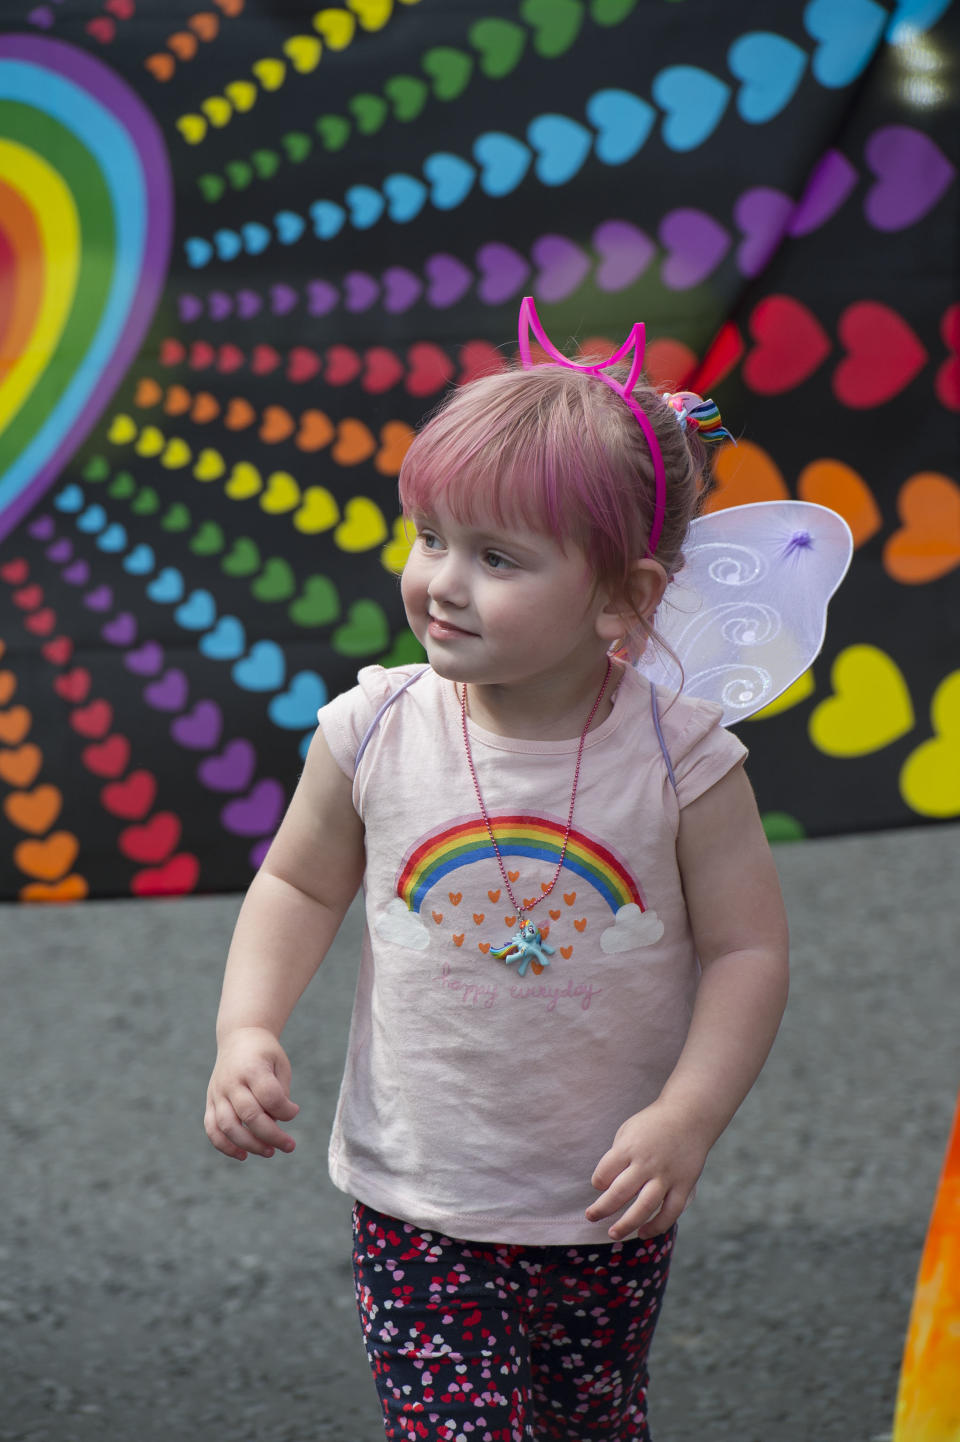 A child is dressed up in rainbow colors during the Belfast Pride parade and festival on August 6, 2016 in Belfast, United Kingdom. (Photo by Carrie Davenport/Getty Images)